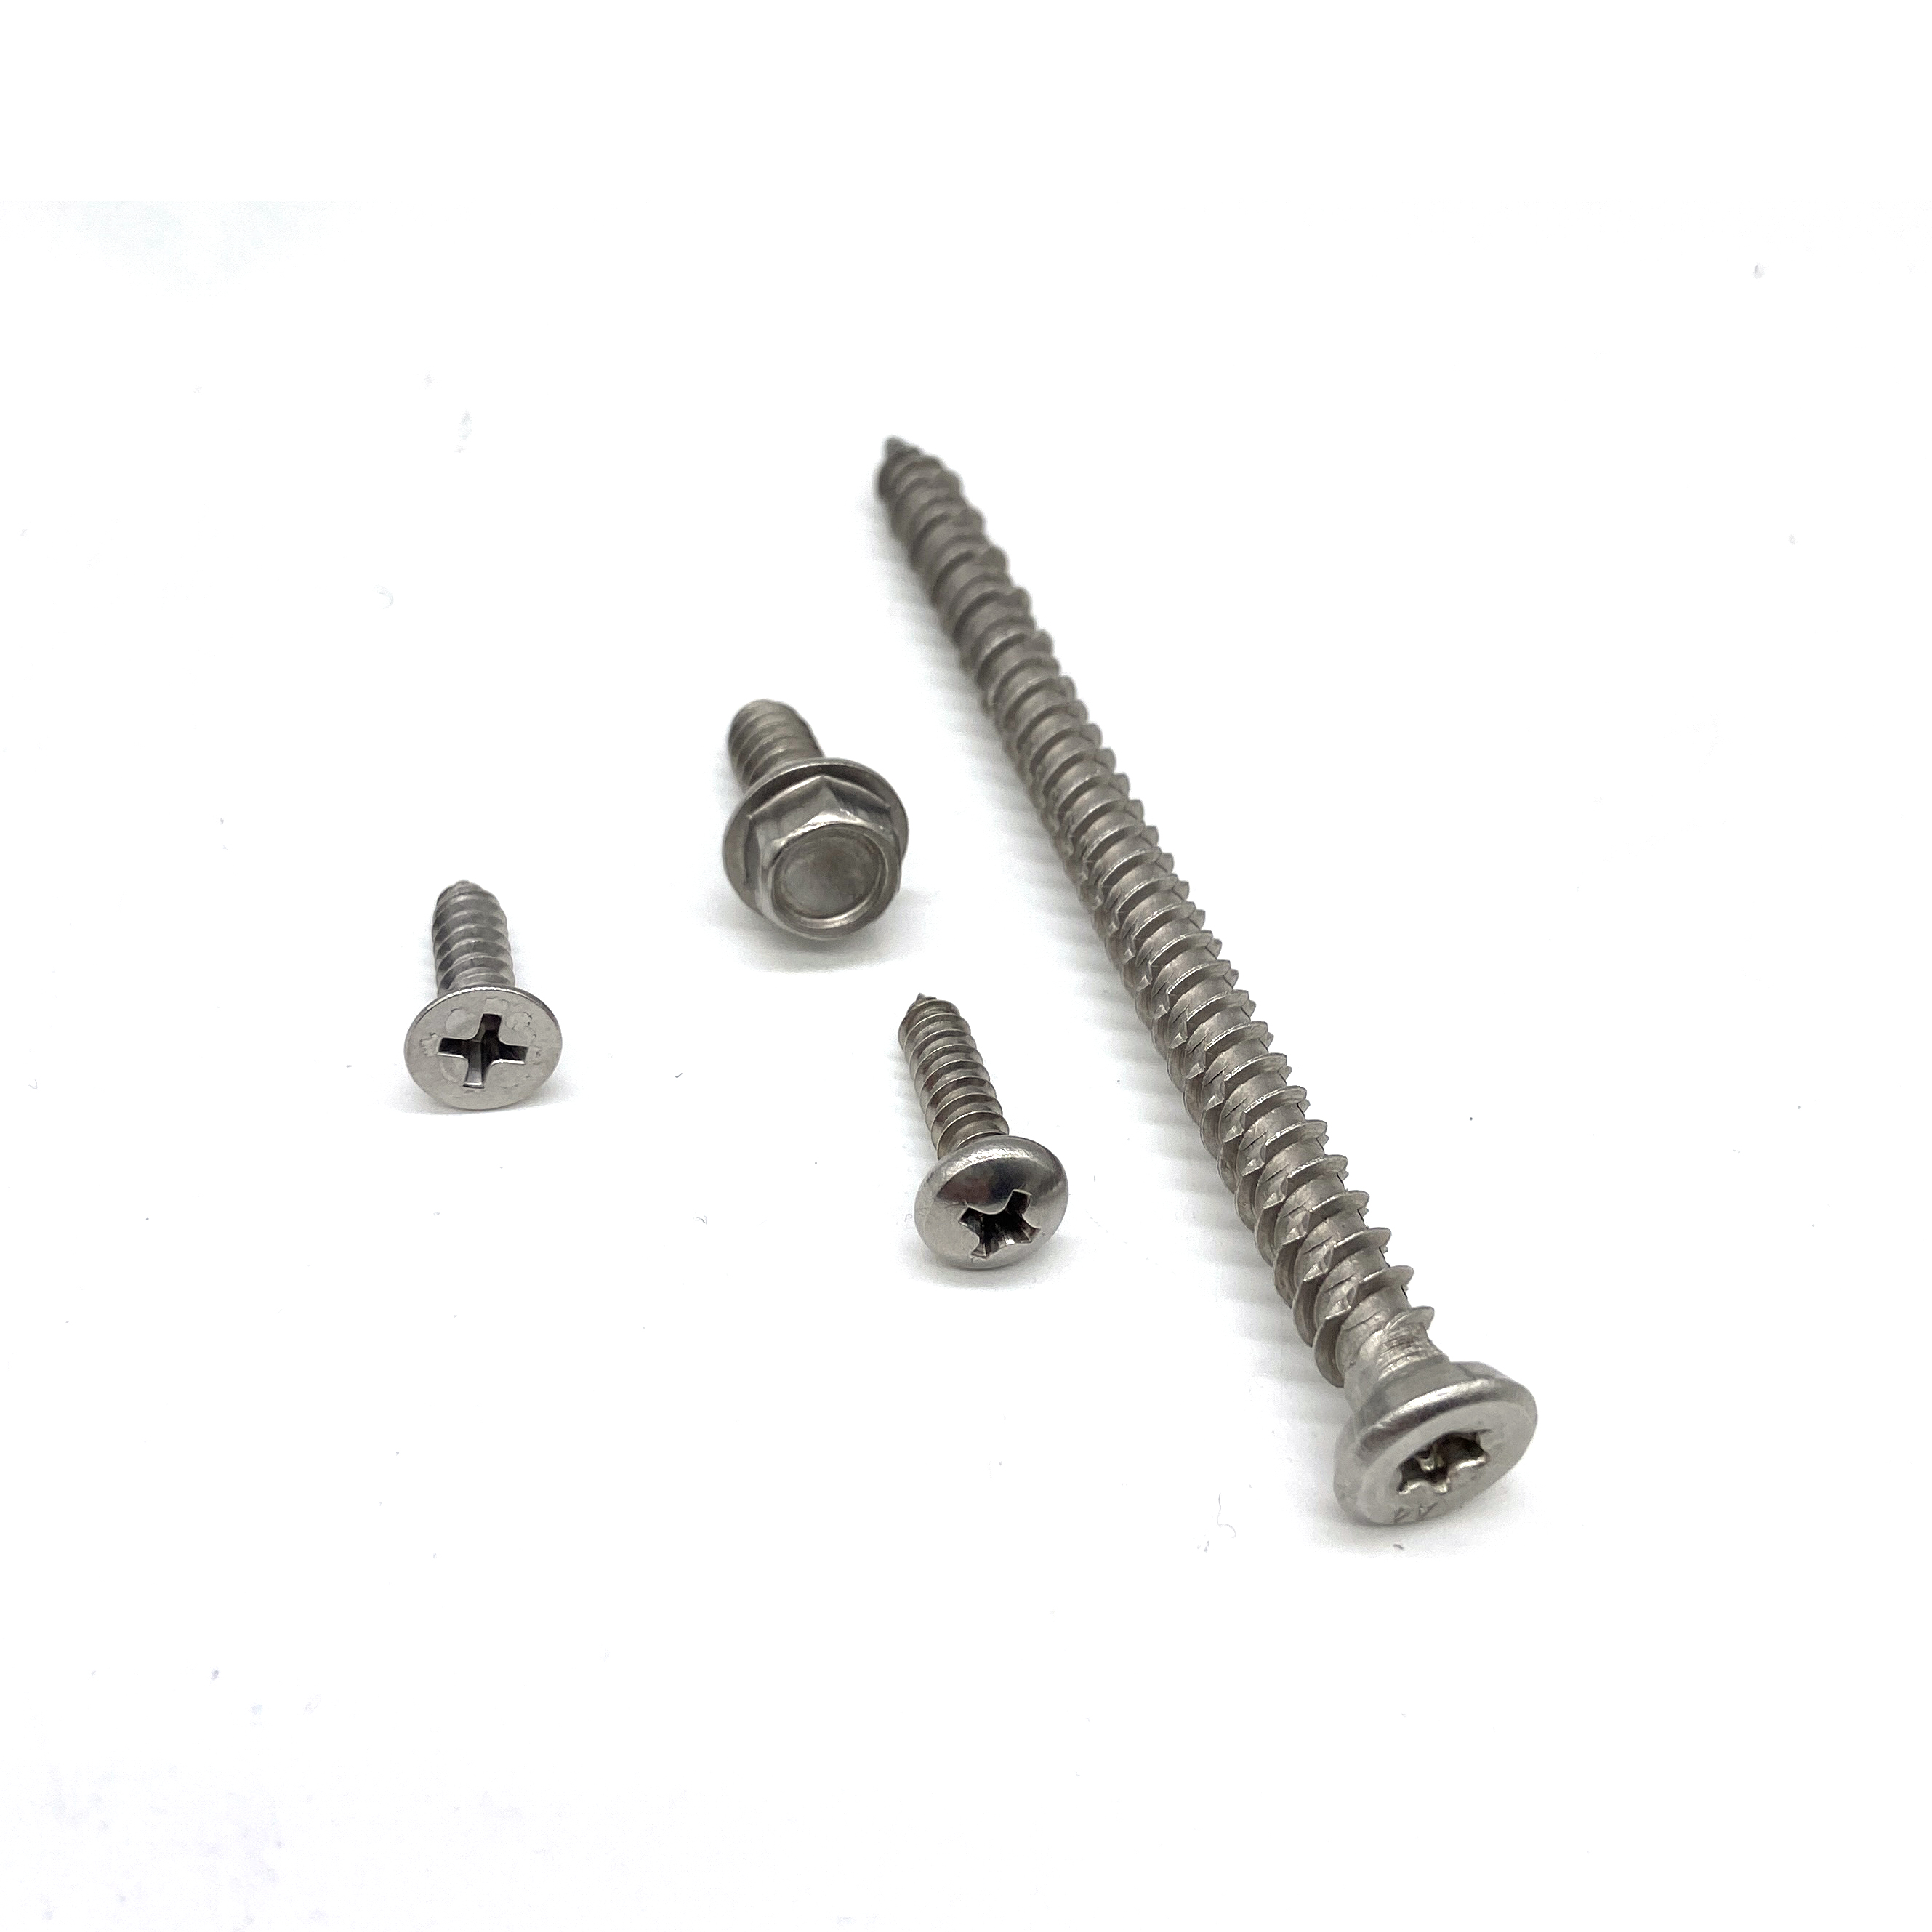 Stainless Steel A2-70 A4-80 Cross Recessed Pan Head Self Tapping Screws 